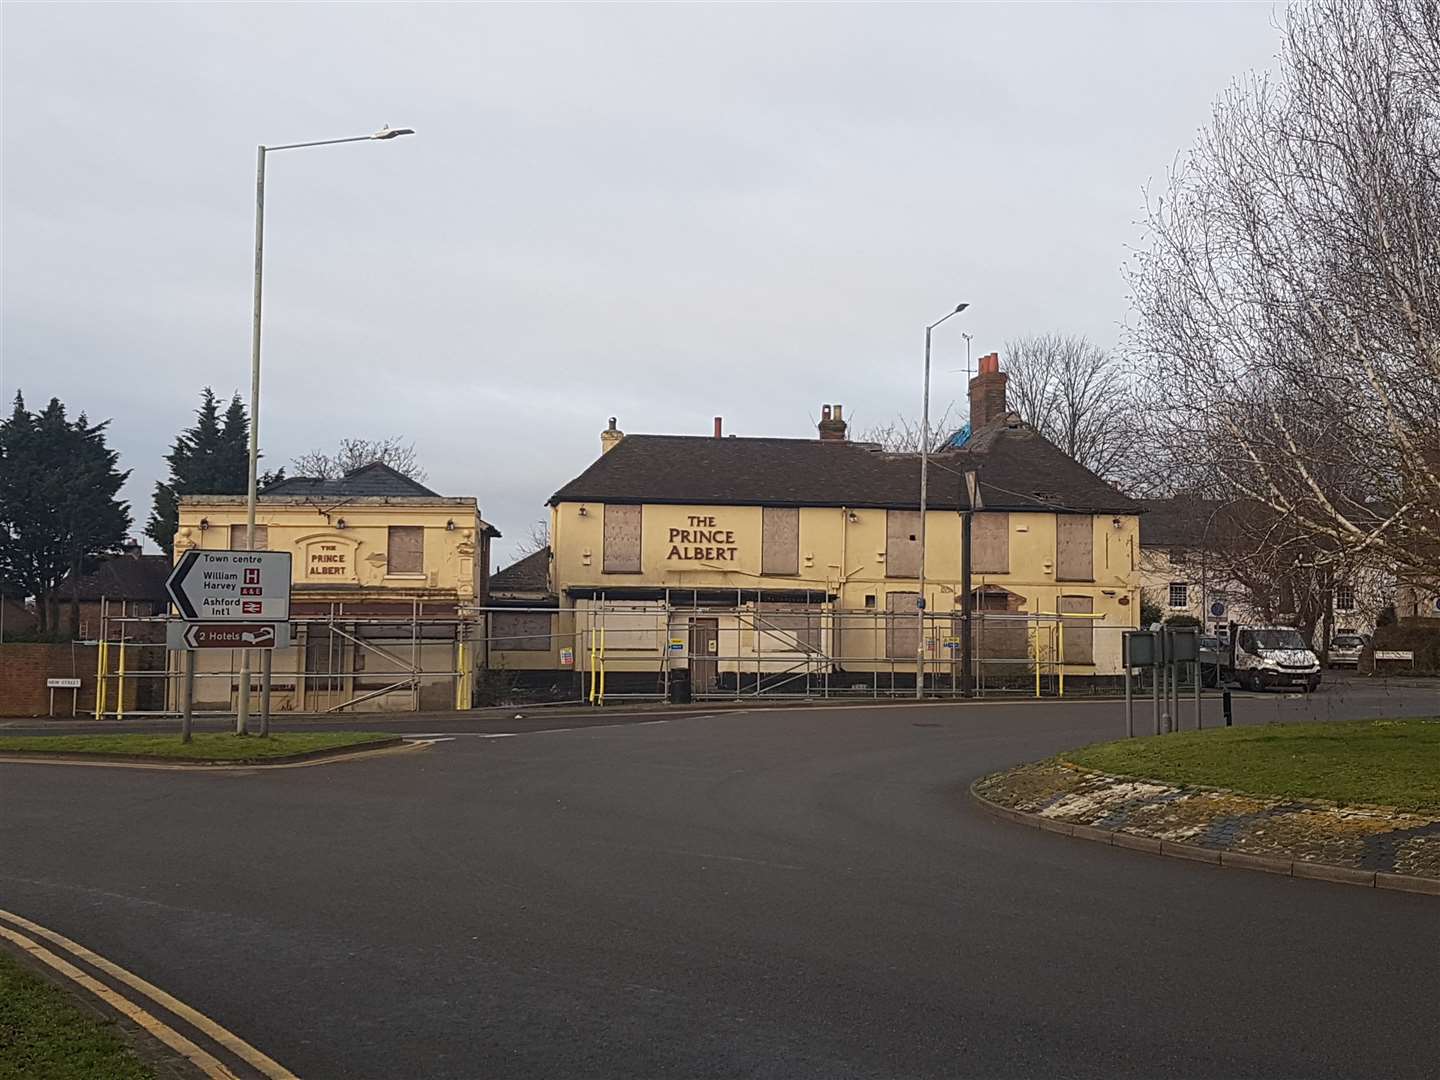 How the prime pub looked before it was bulldozed